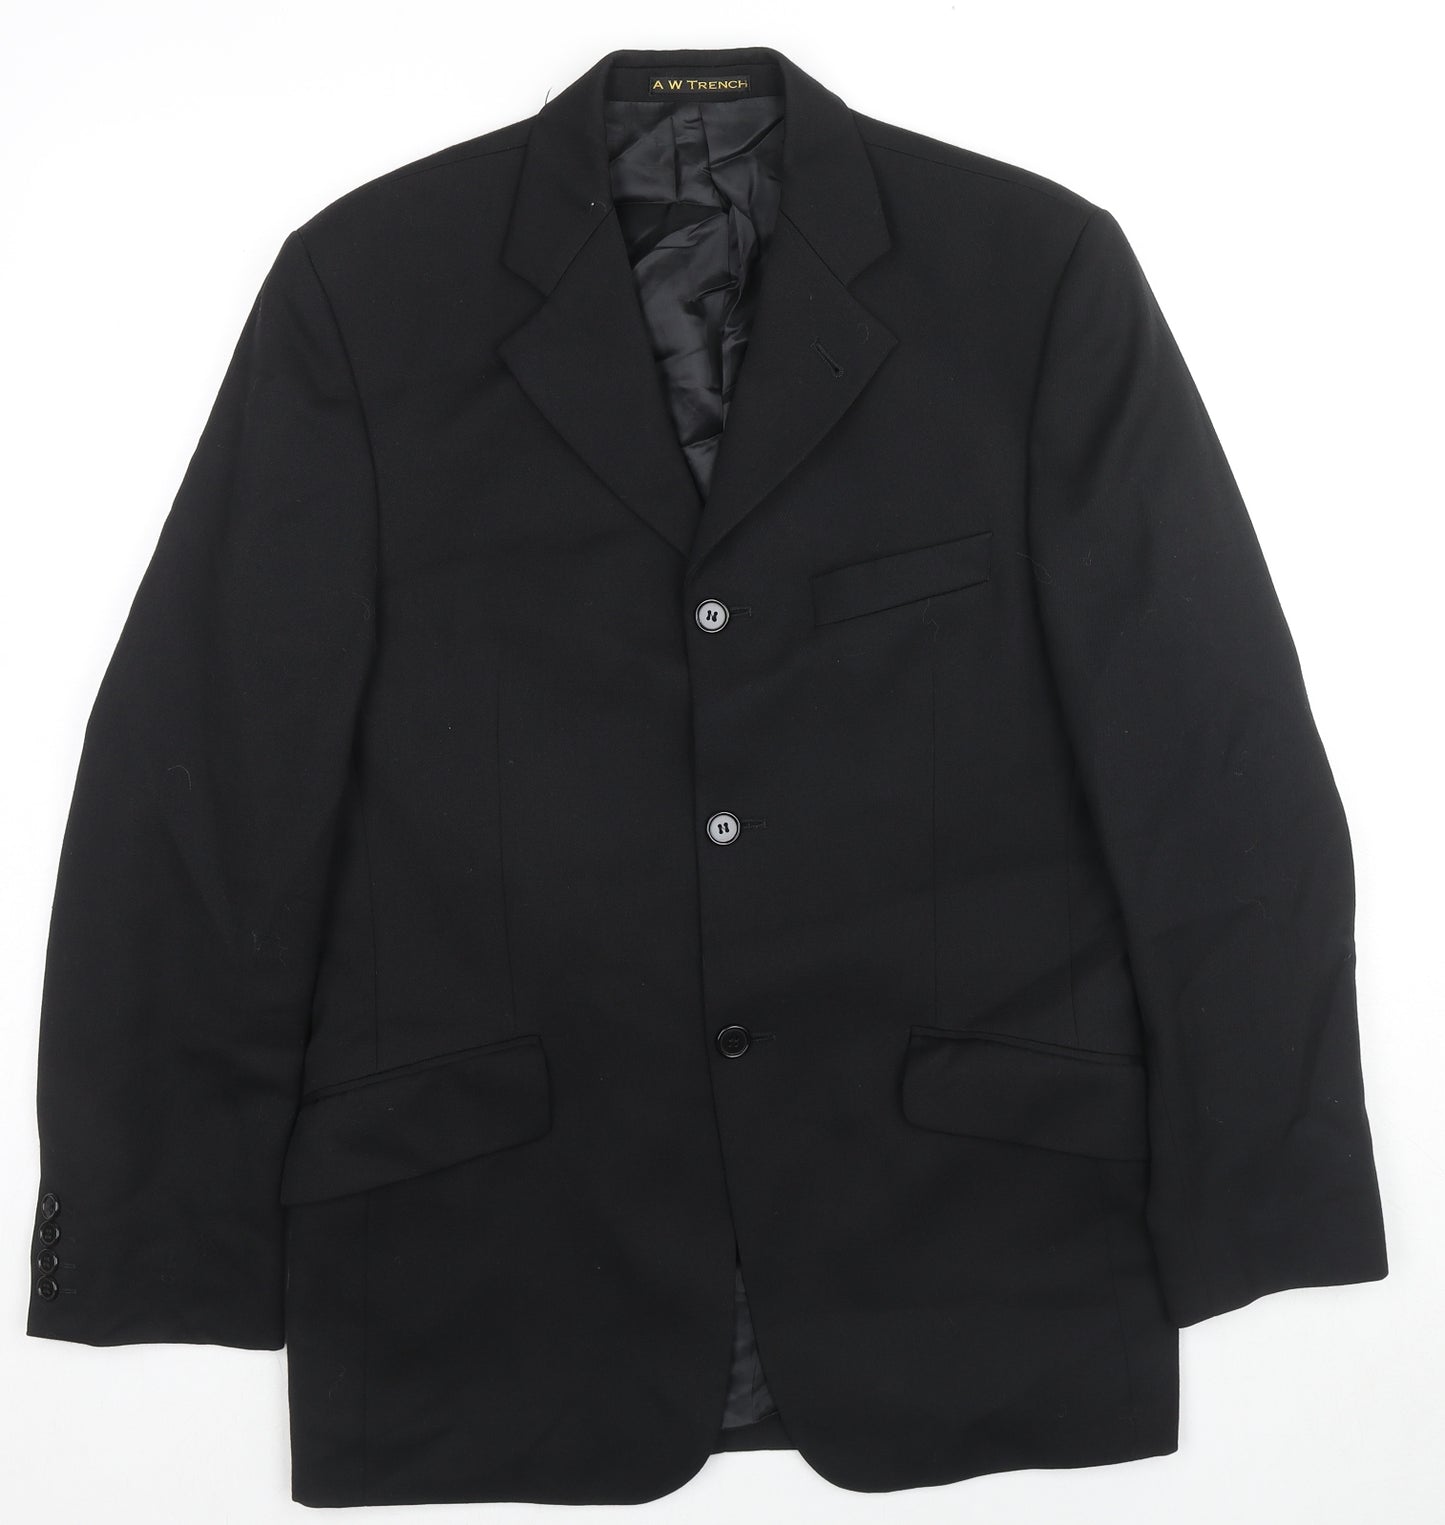 A.W Trench Mens Black Wool Jacket Suit Jacket Size 36 Regular